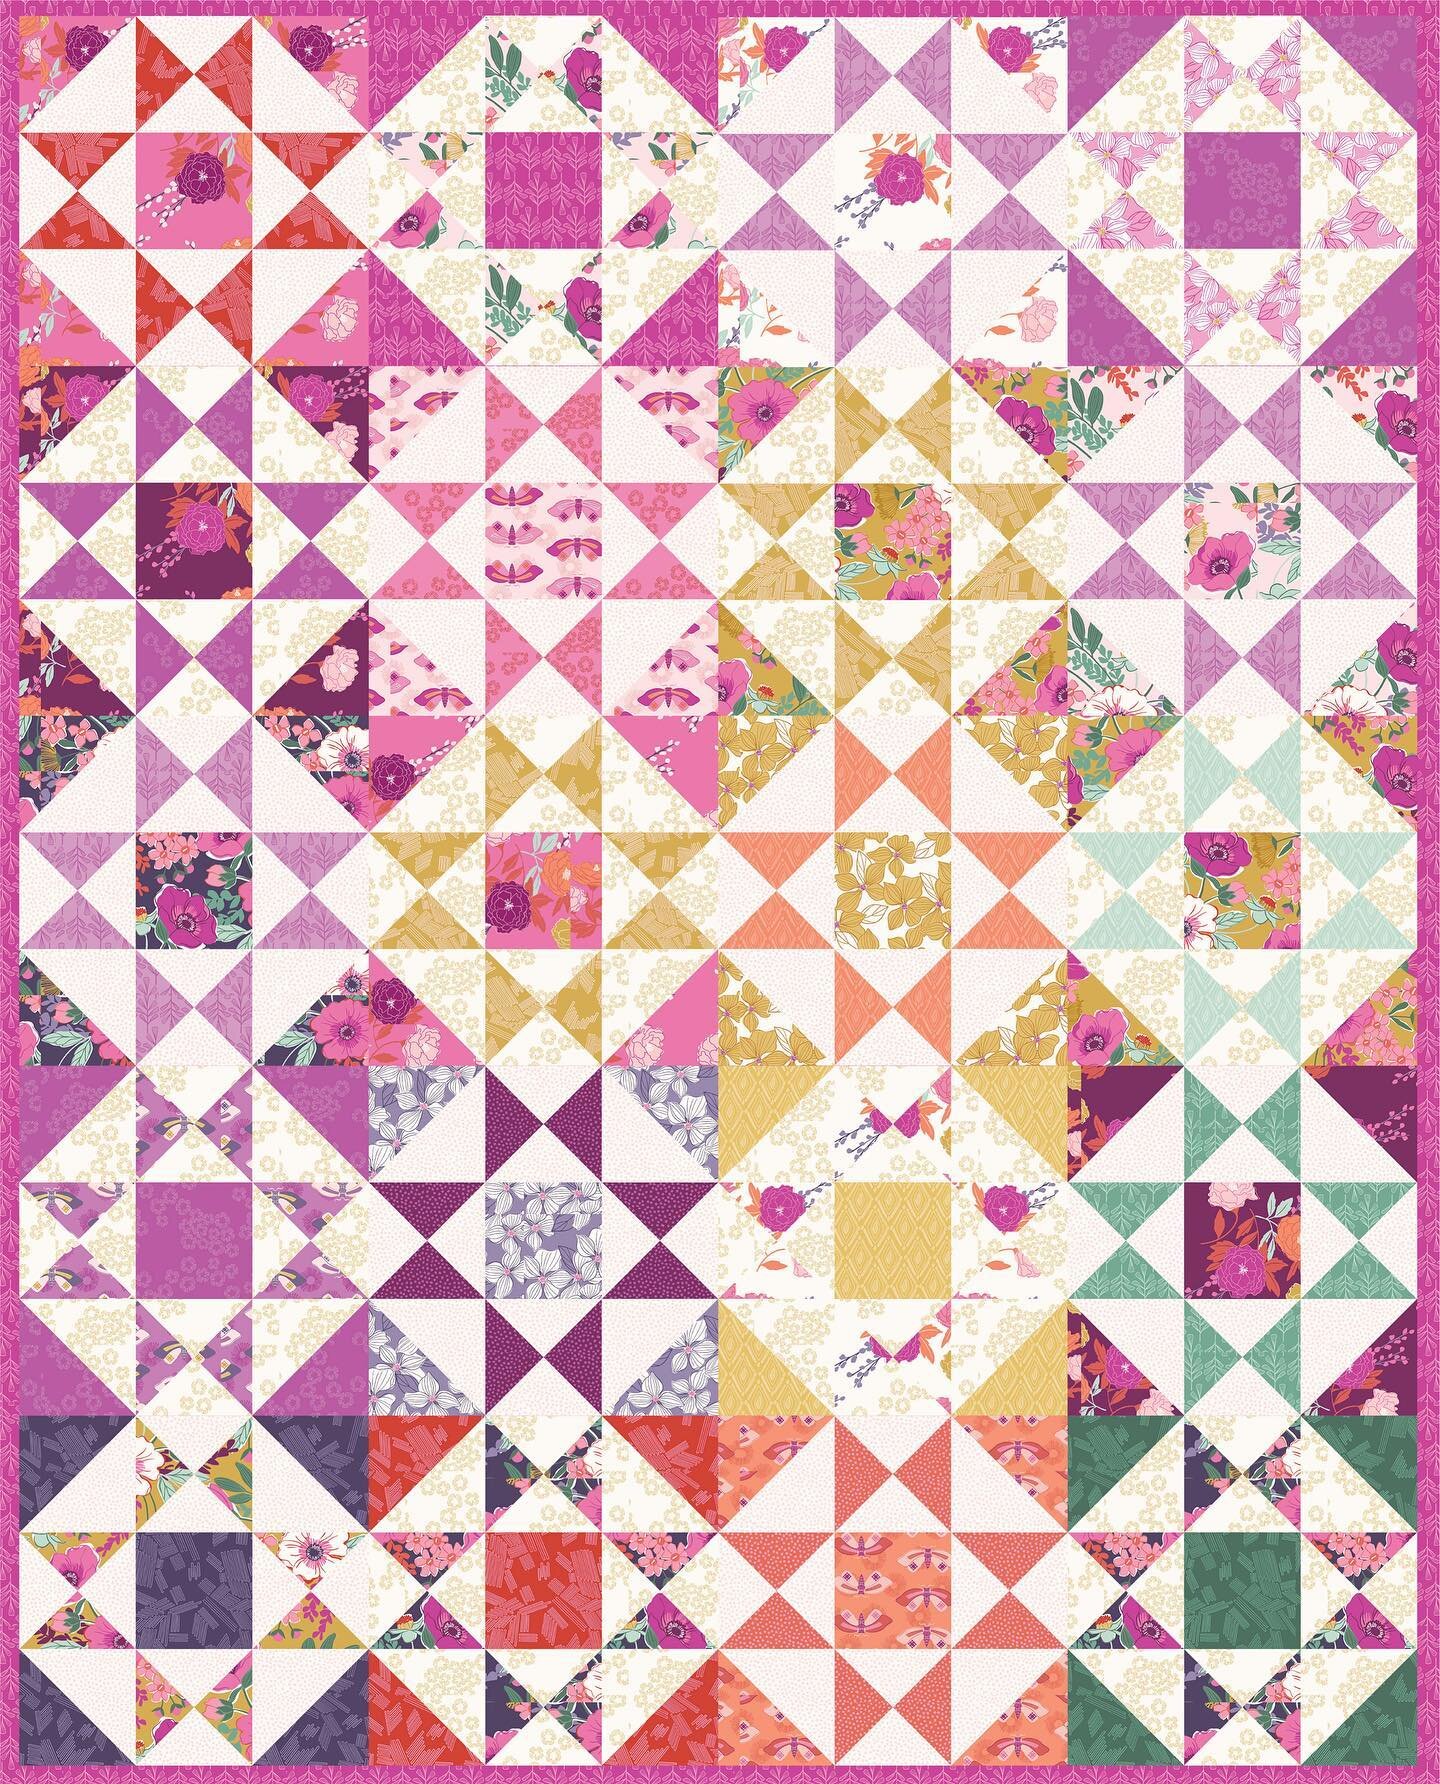 The wait is over! 🎉 My quilt pattern &quot;Wandering&quot; designed for my latest fabric line is now available on my website. And the best part? It's FREE! To download this pattern, simply subscribe to my newsletter by clicking the link in my bio. I